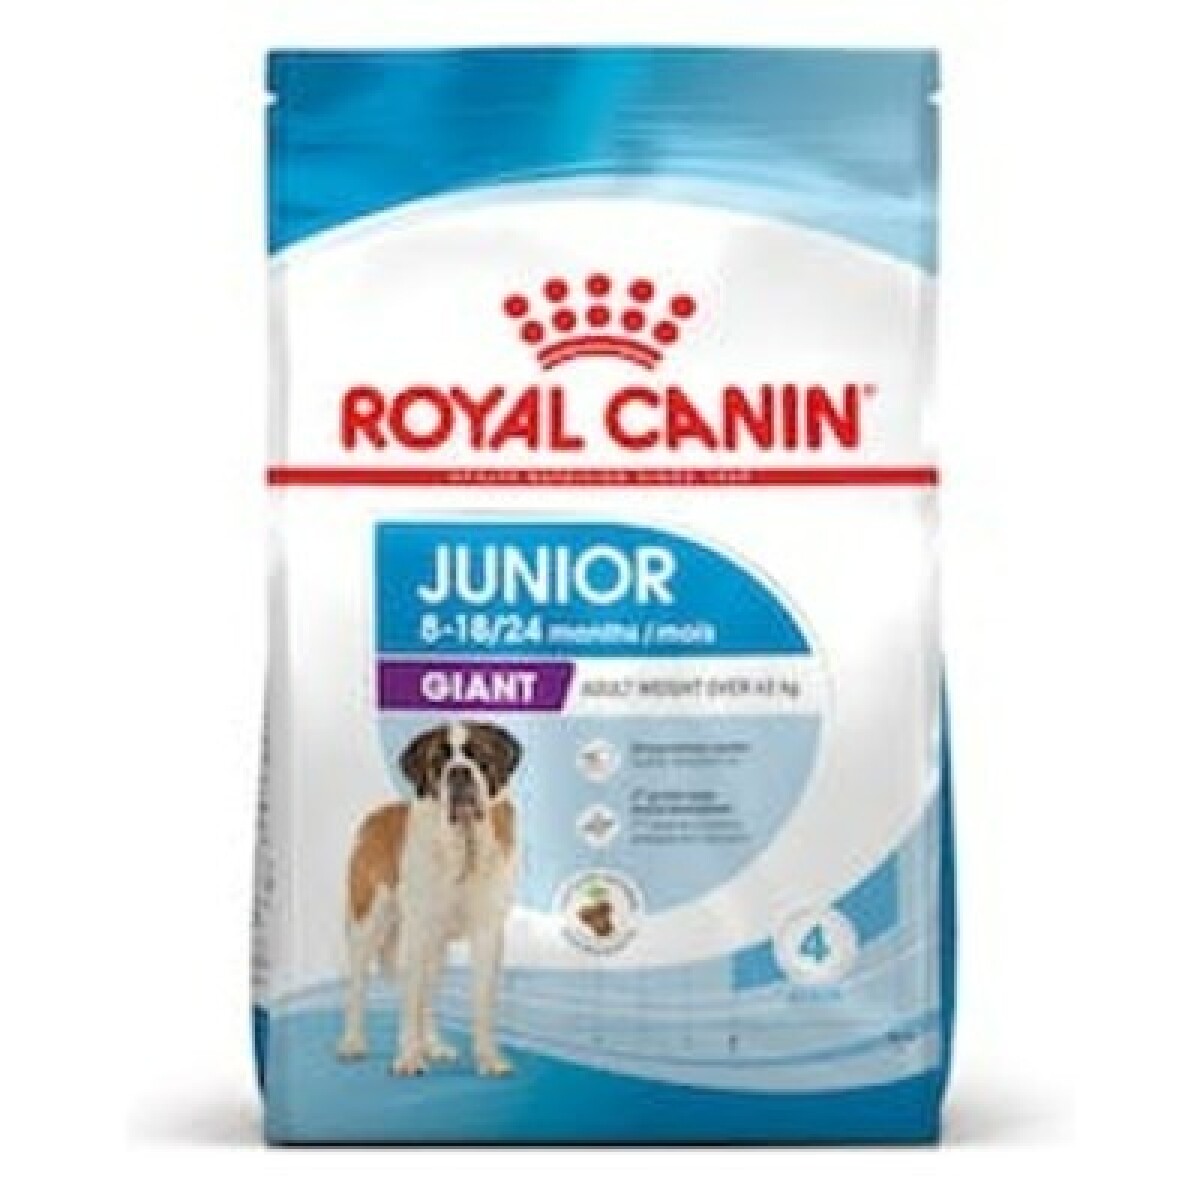 ROYAL CANIN PERRO GIGANTE ADULT 15 KG - Unica 